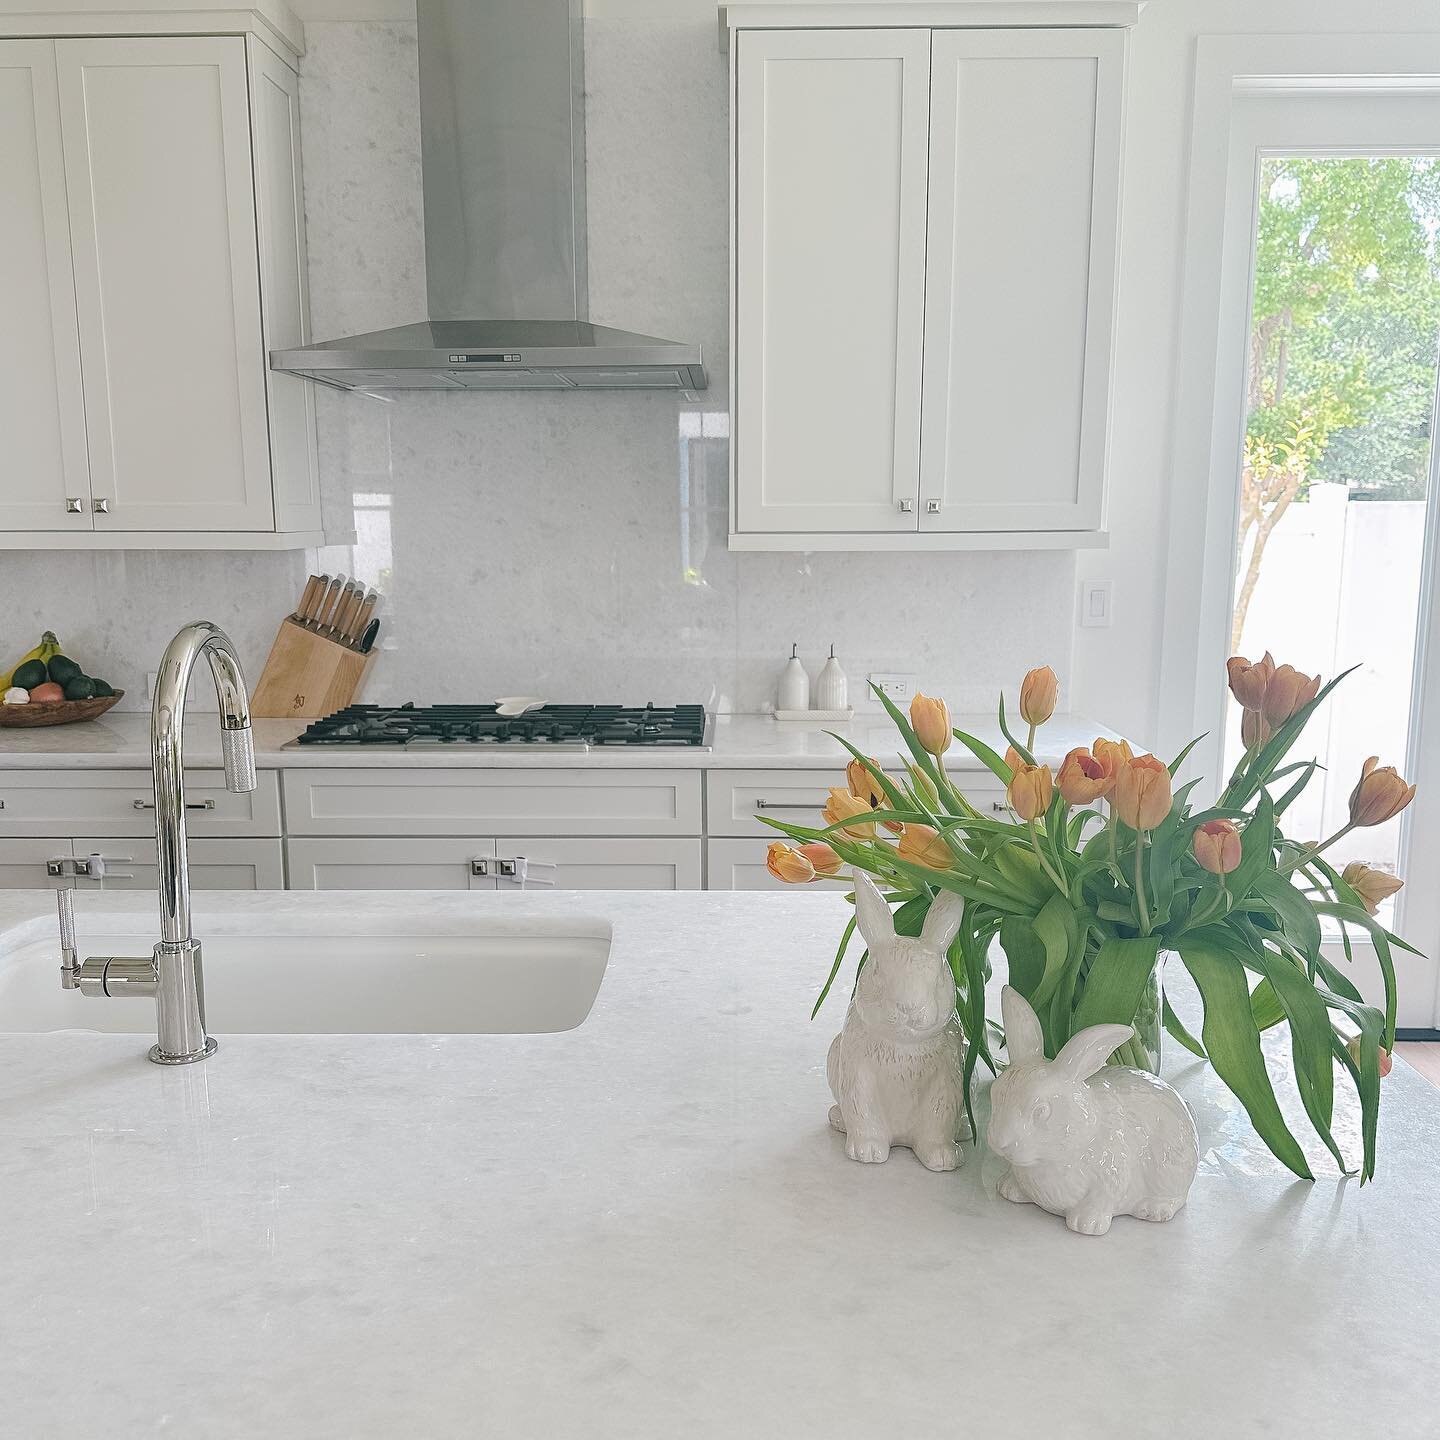 feels like spring with all of the blooming flowers outside and a Full Detox is the best way to kick off your spring cleaning!! it's our version of a deep clean, a fully comprehensive clean touching virtually every surface of your home without the tox